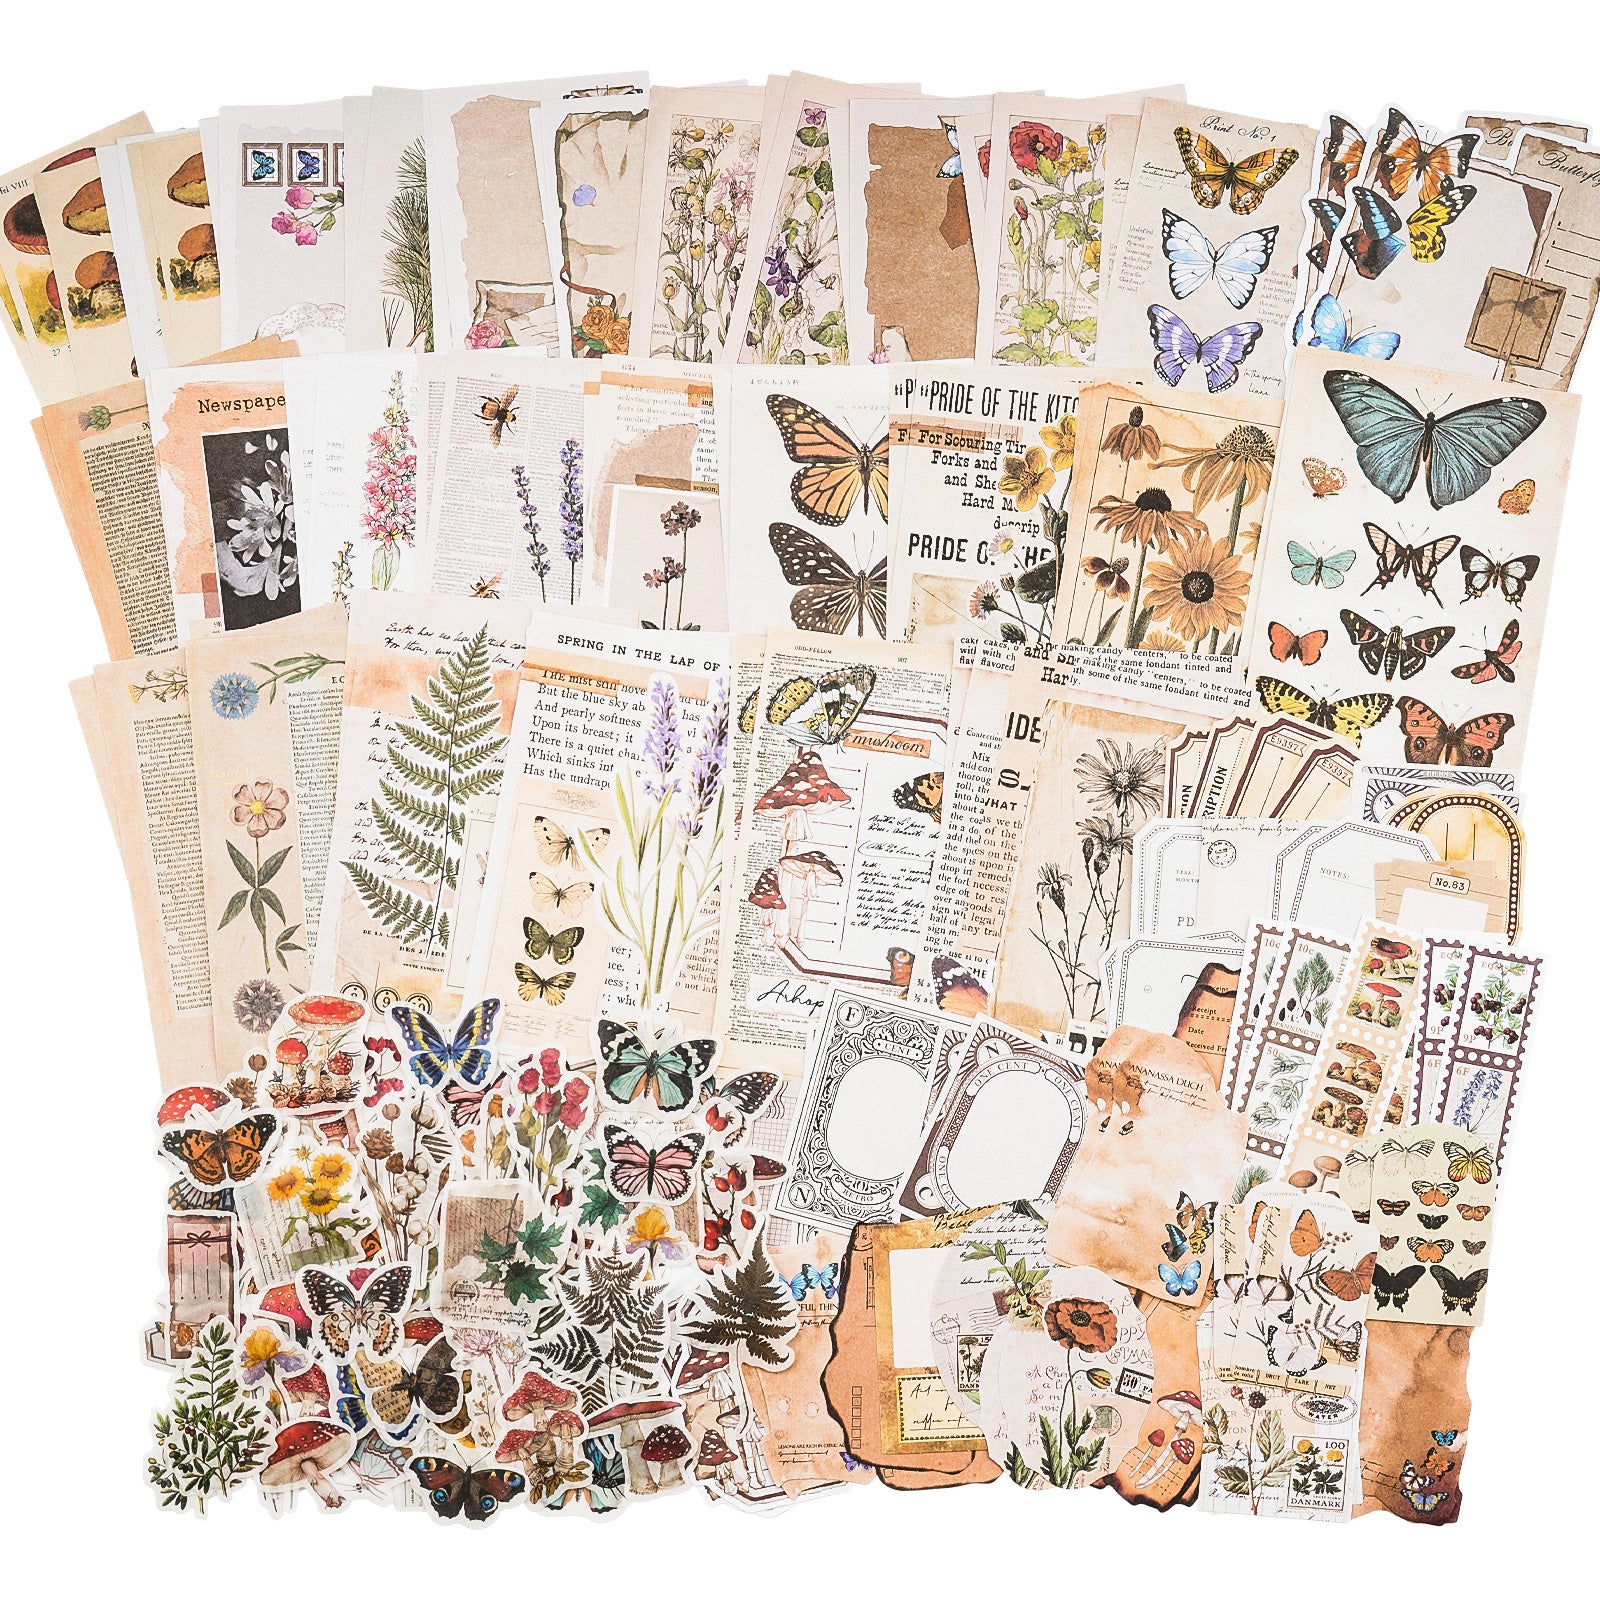 Retro Christmas Series Decorative Material Paper Gift Wrapping Paper  Collage Junk Journals Scrapbookings Stationery Supply